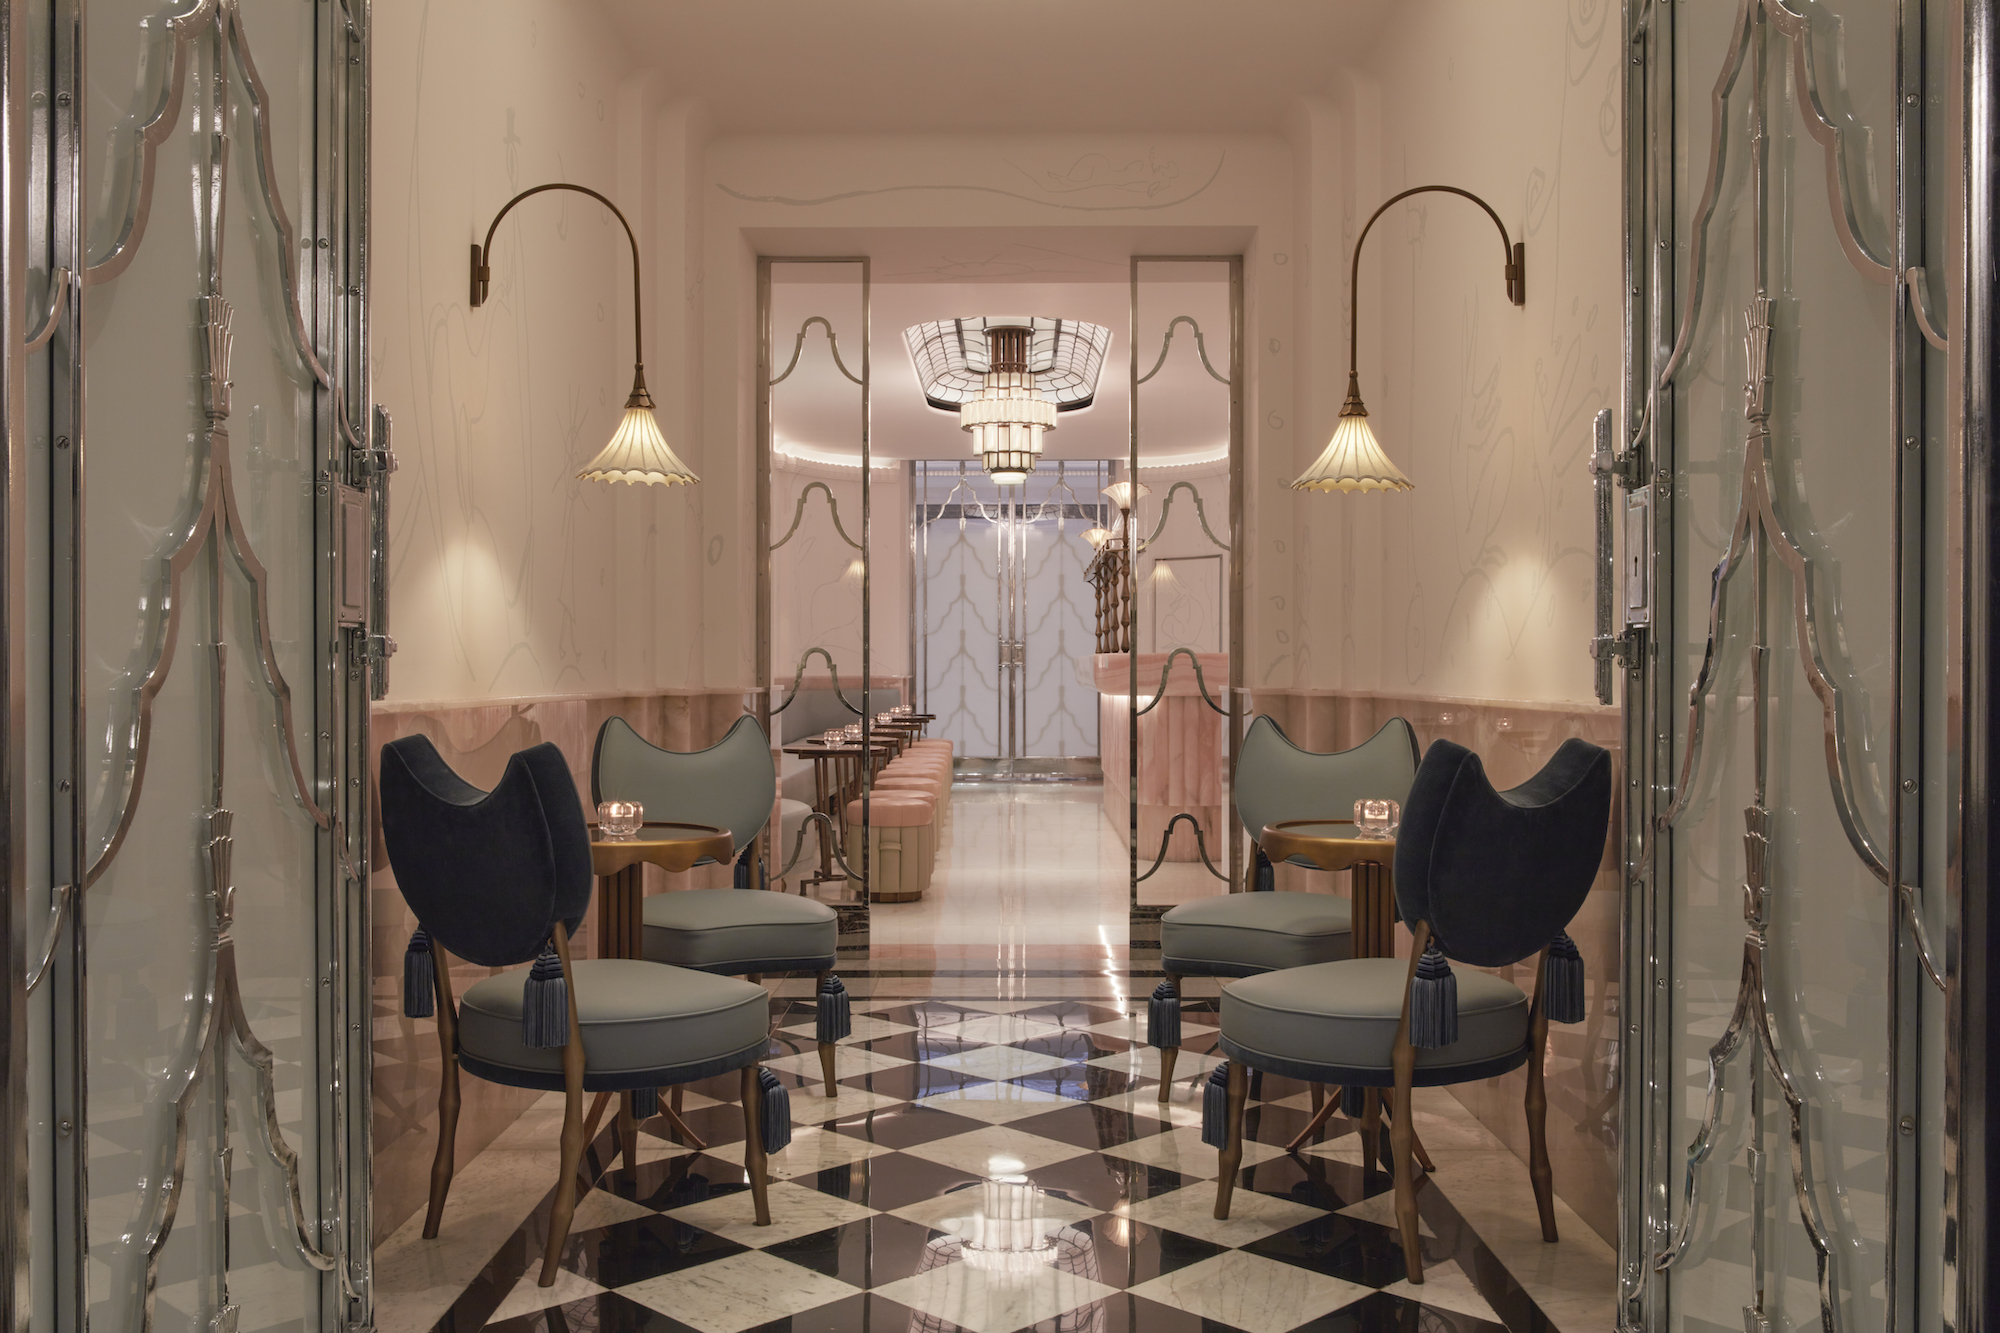 The cocktail bar at The Painter’s Room at Claridge’s was the winner of the best design bar in Europe at the 2022 Restaurant & Bar Design Awards - Effect Magazine